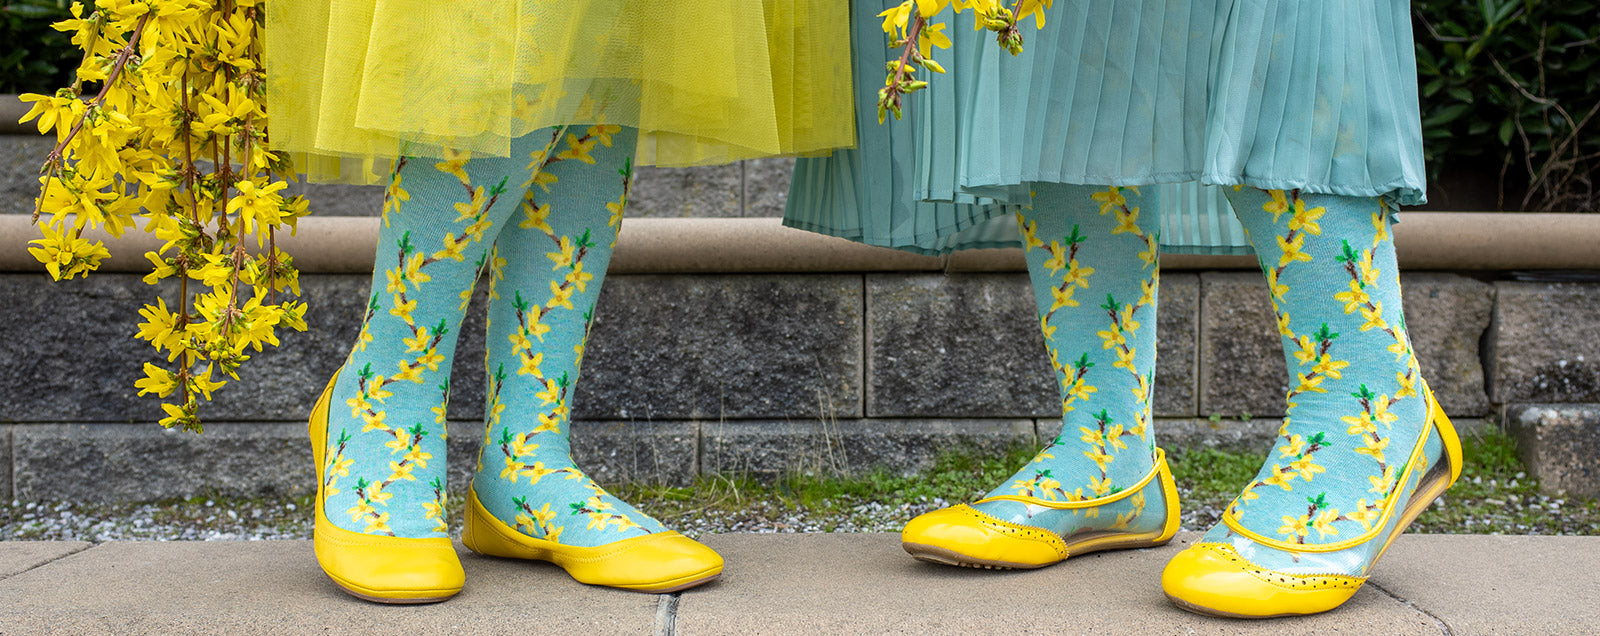 Two models wear yellow ballet flats and floral knee socks with bright yellow forsythia flowers over a pale aqua background.